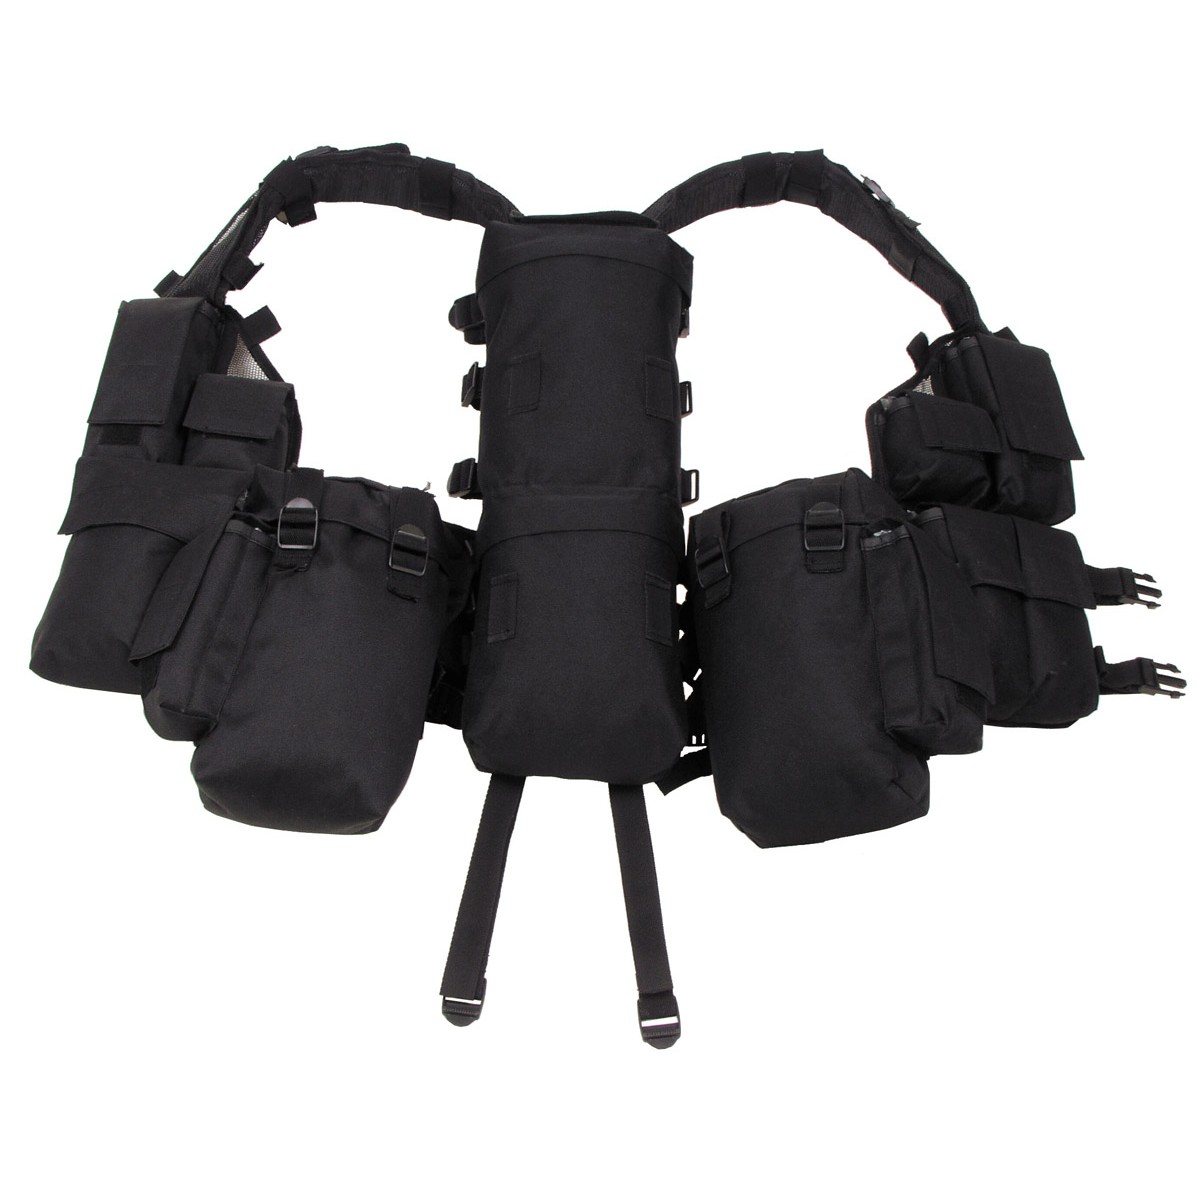  Military Spec Ops Tactical Police Vest with Various Pockets